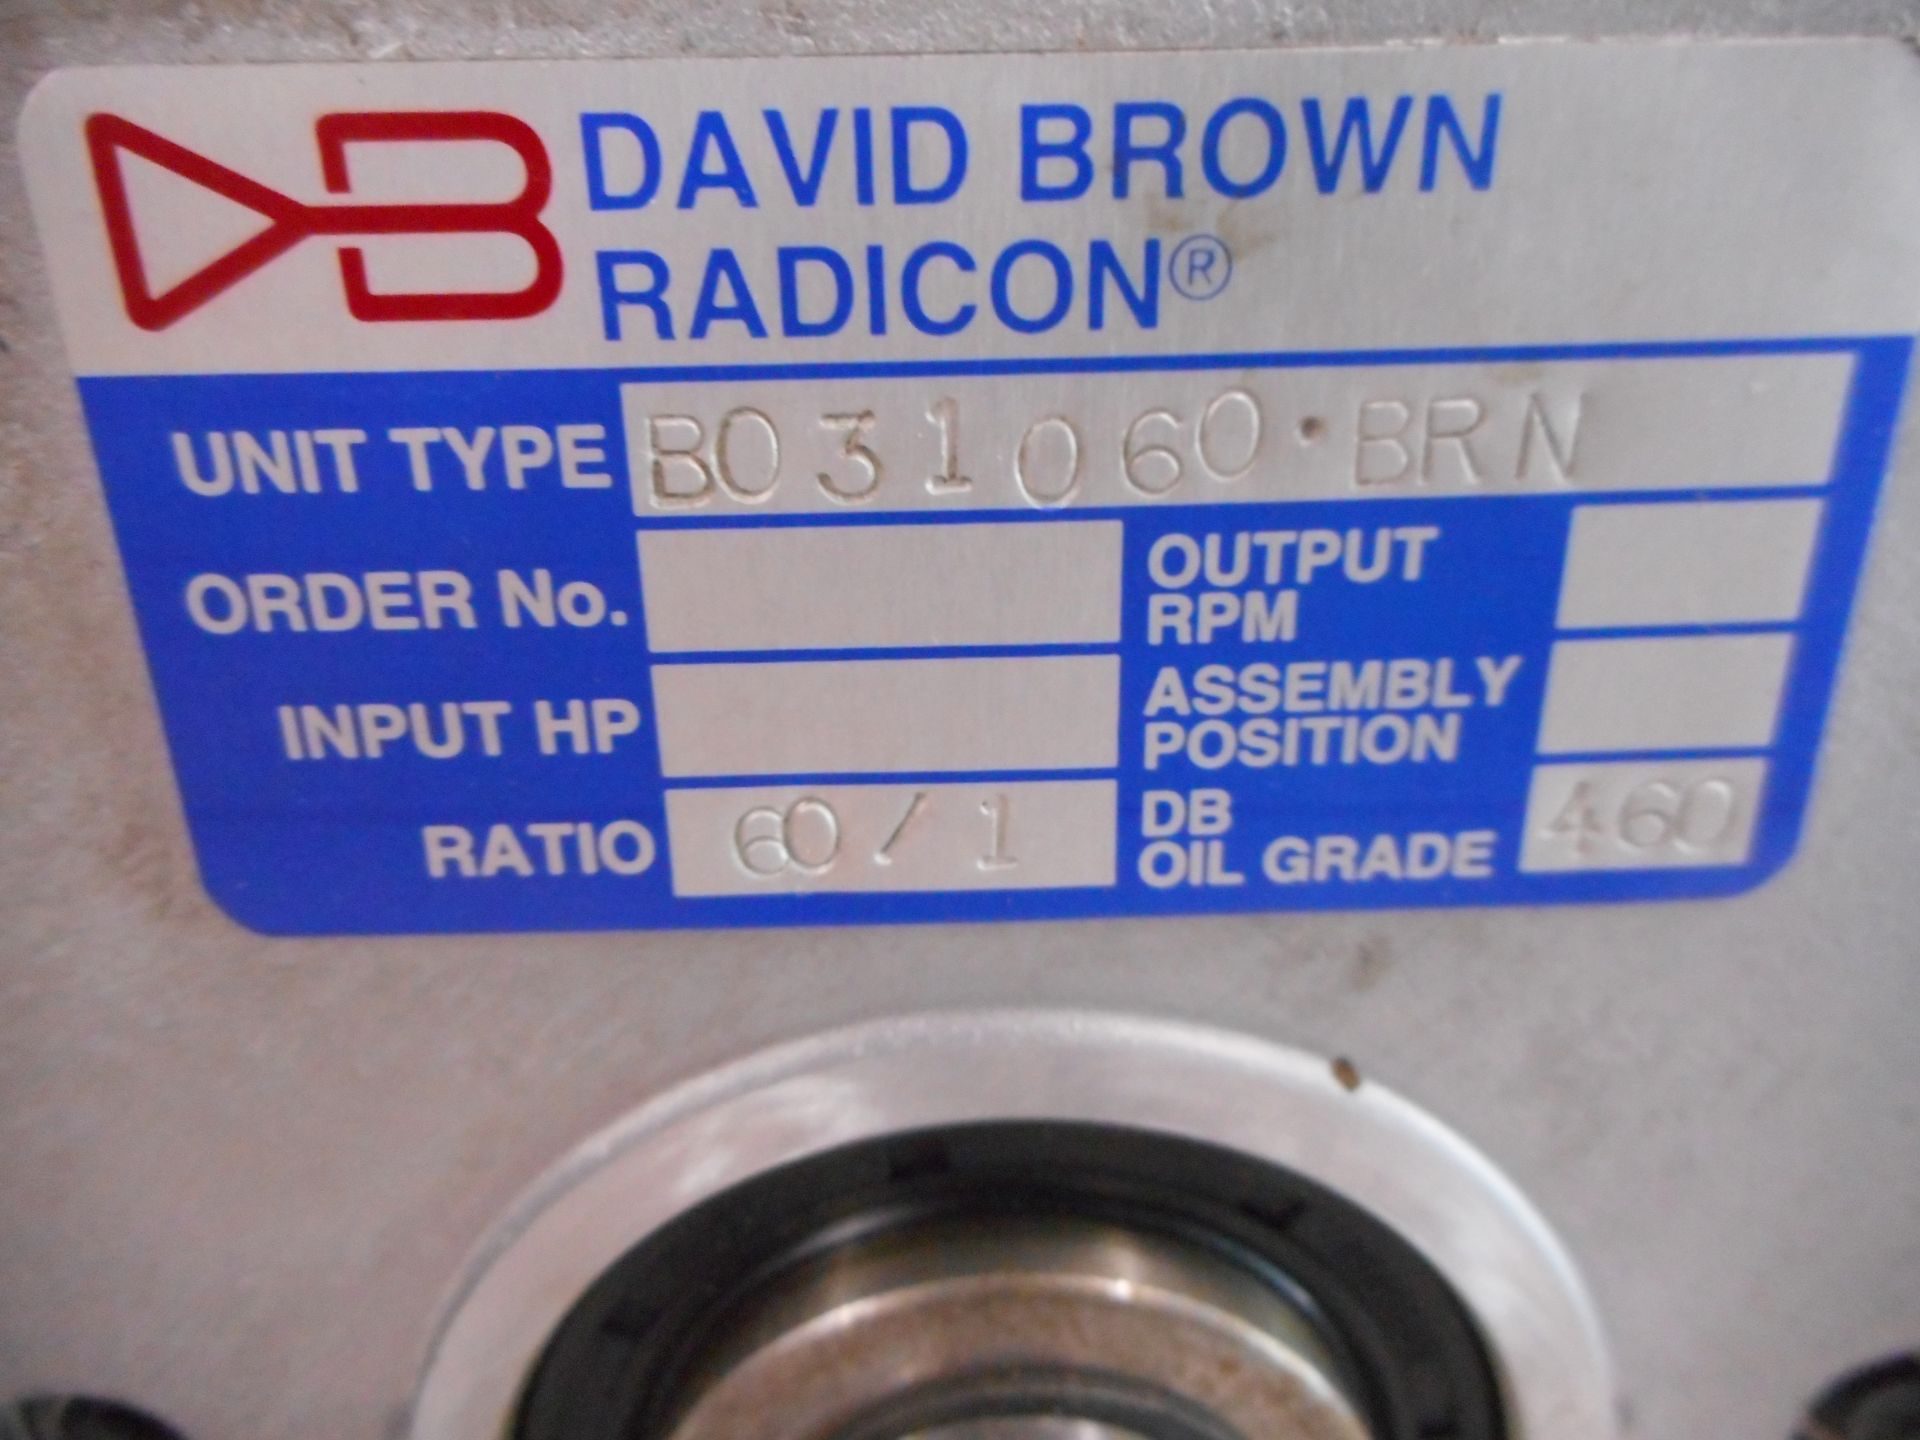 Lot of 2 David Brown Radicon STAINLESS STEEL Gearbox - Image 2 of 2